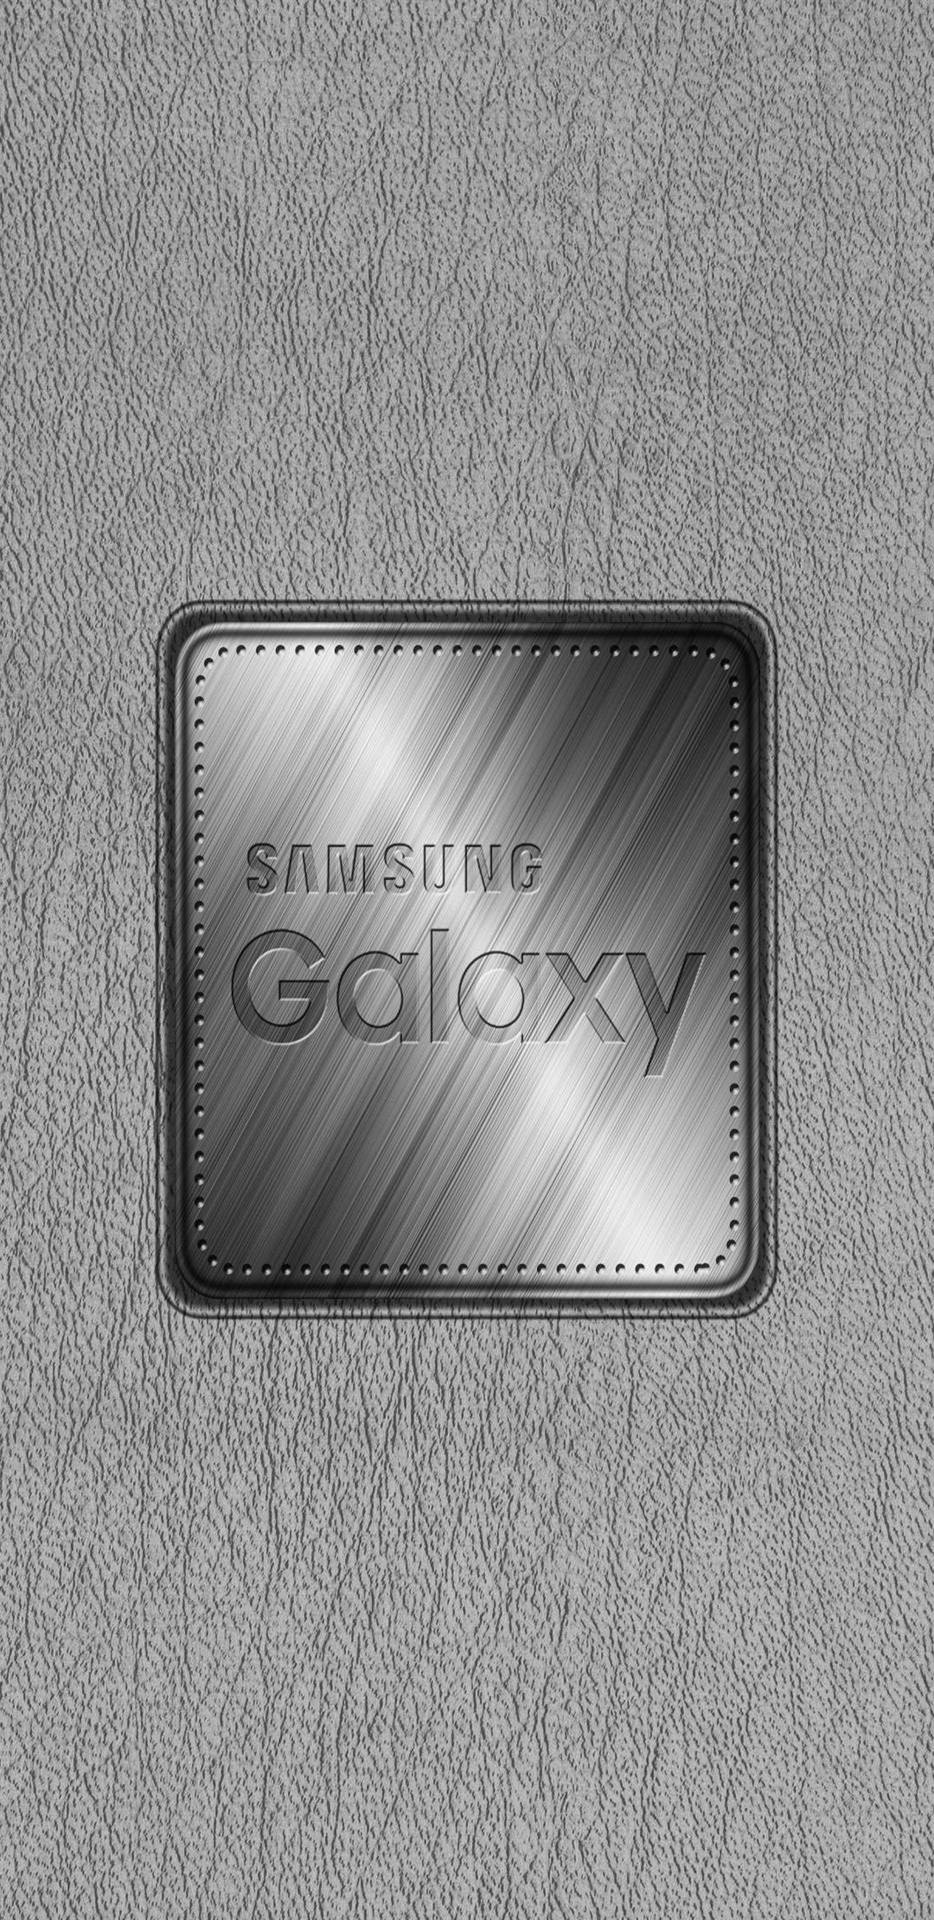 Samsung Galaxy Silver Leather Texture Background